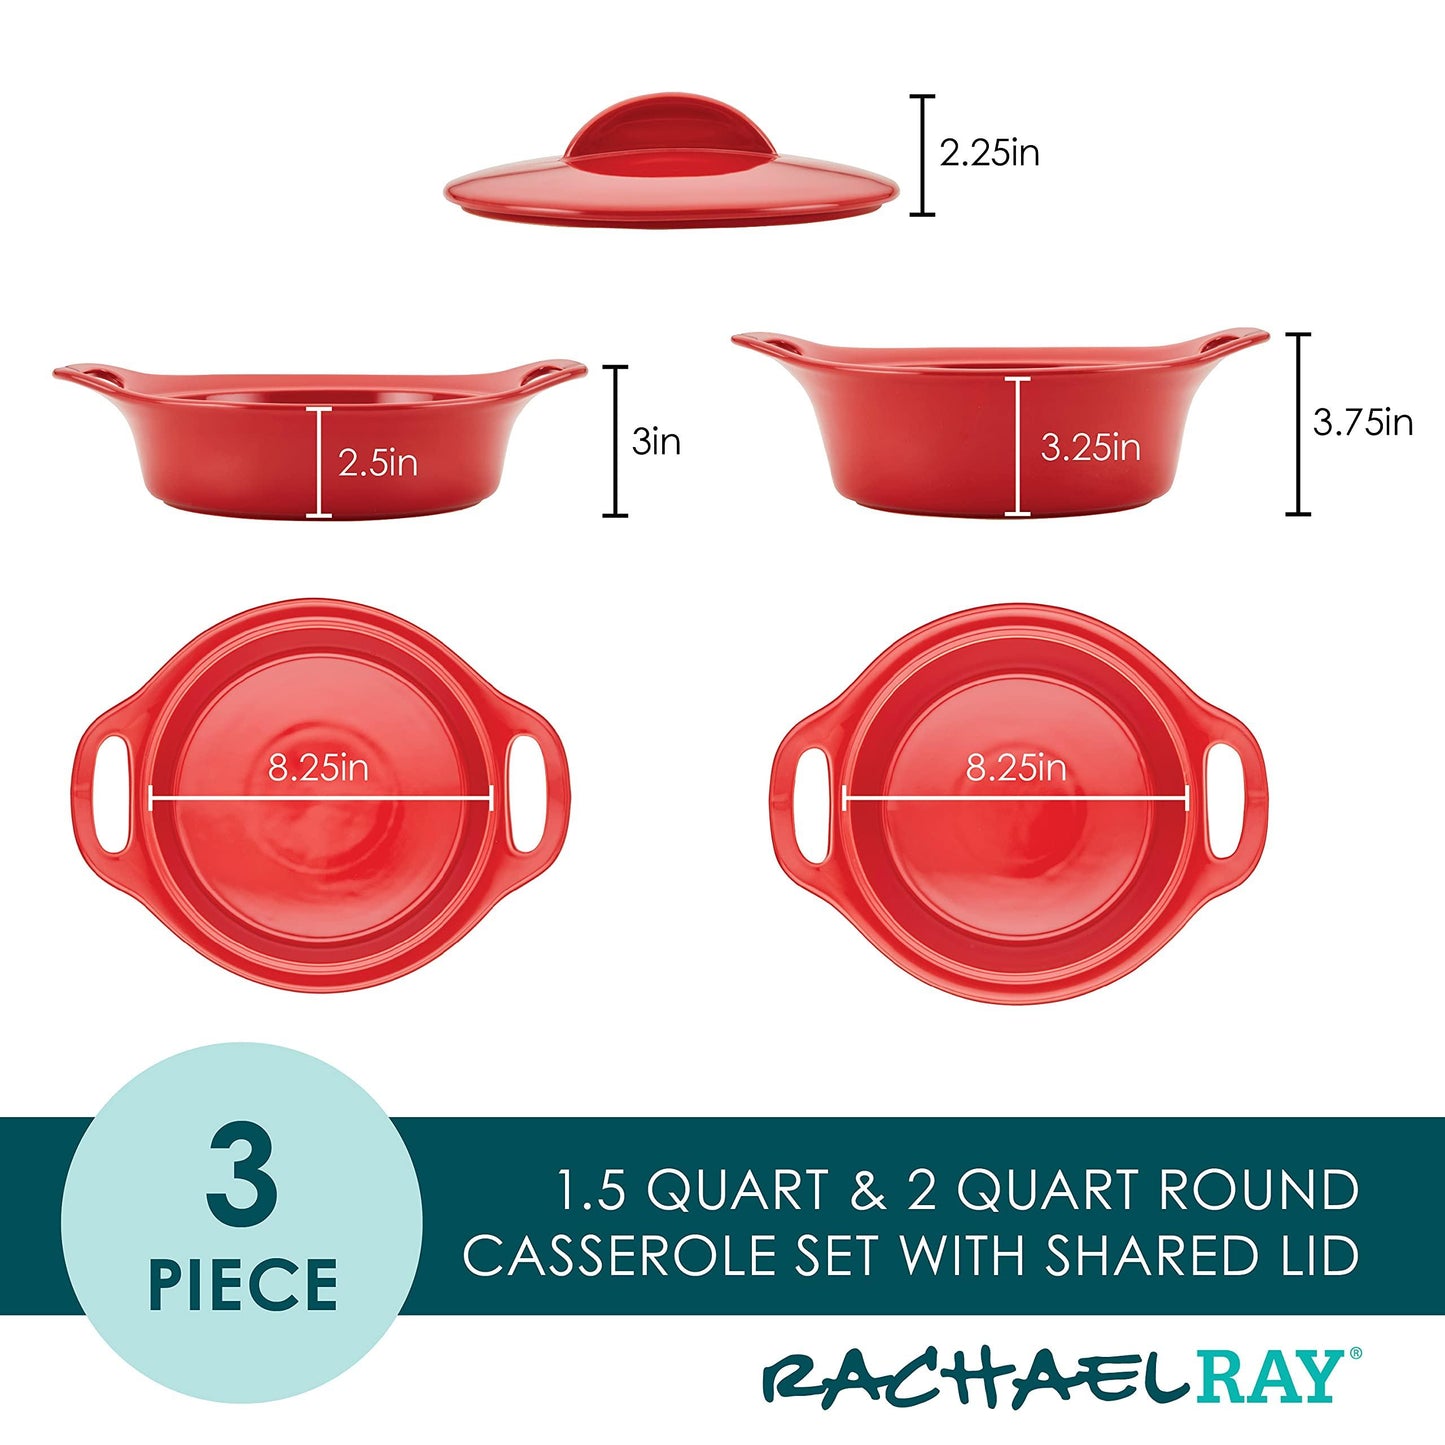 Rachael Ray Solid Glaze Ceramics Casserole Bakers/Baking Dish with Shared Lid Set, 3 Piece, Red - CookCave